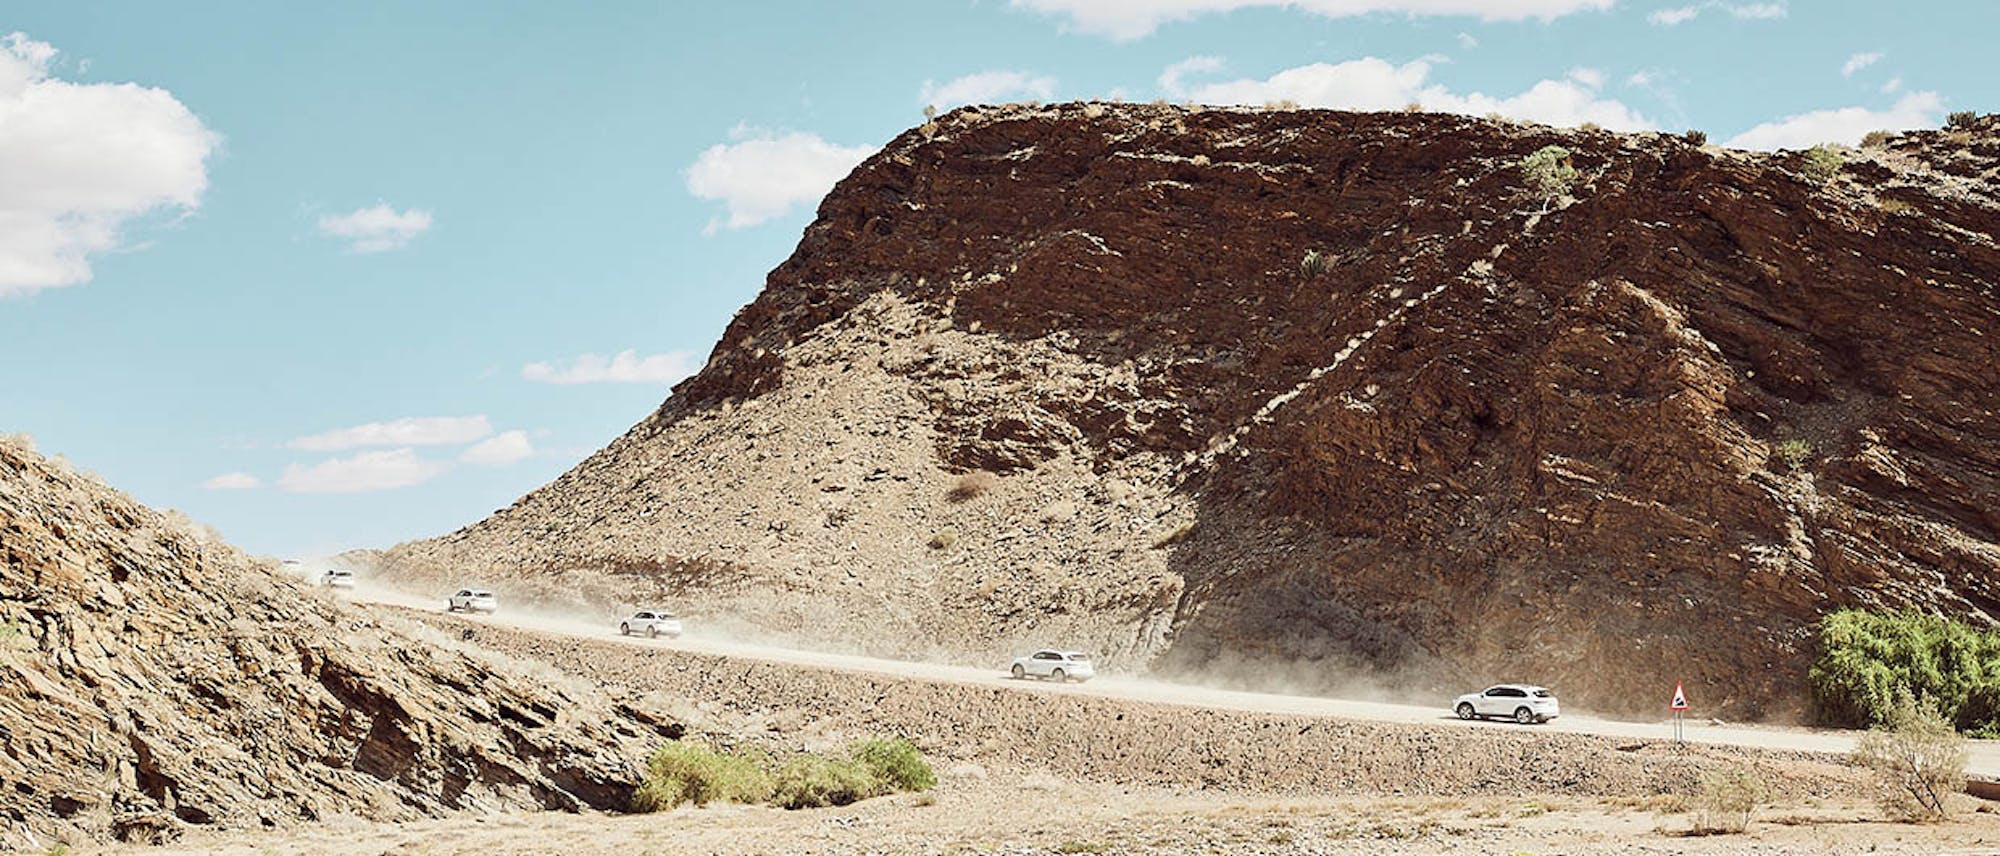 Cars driving on rough terrain in front of a mountain